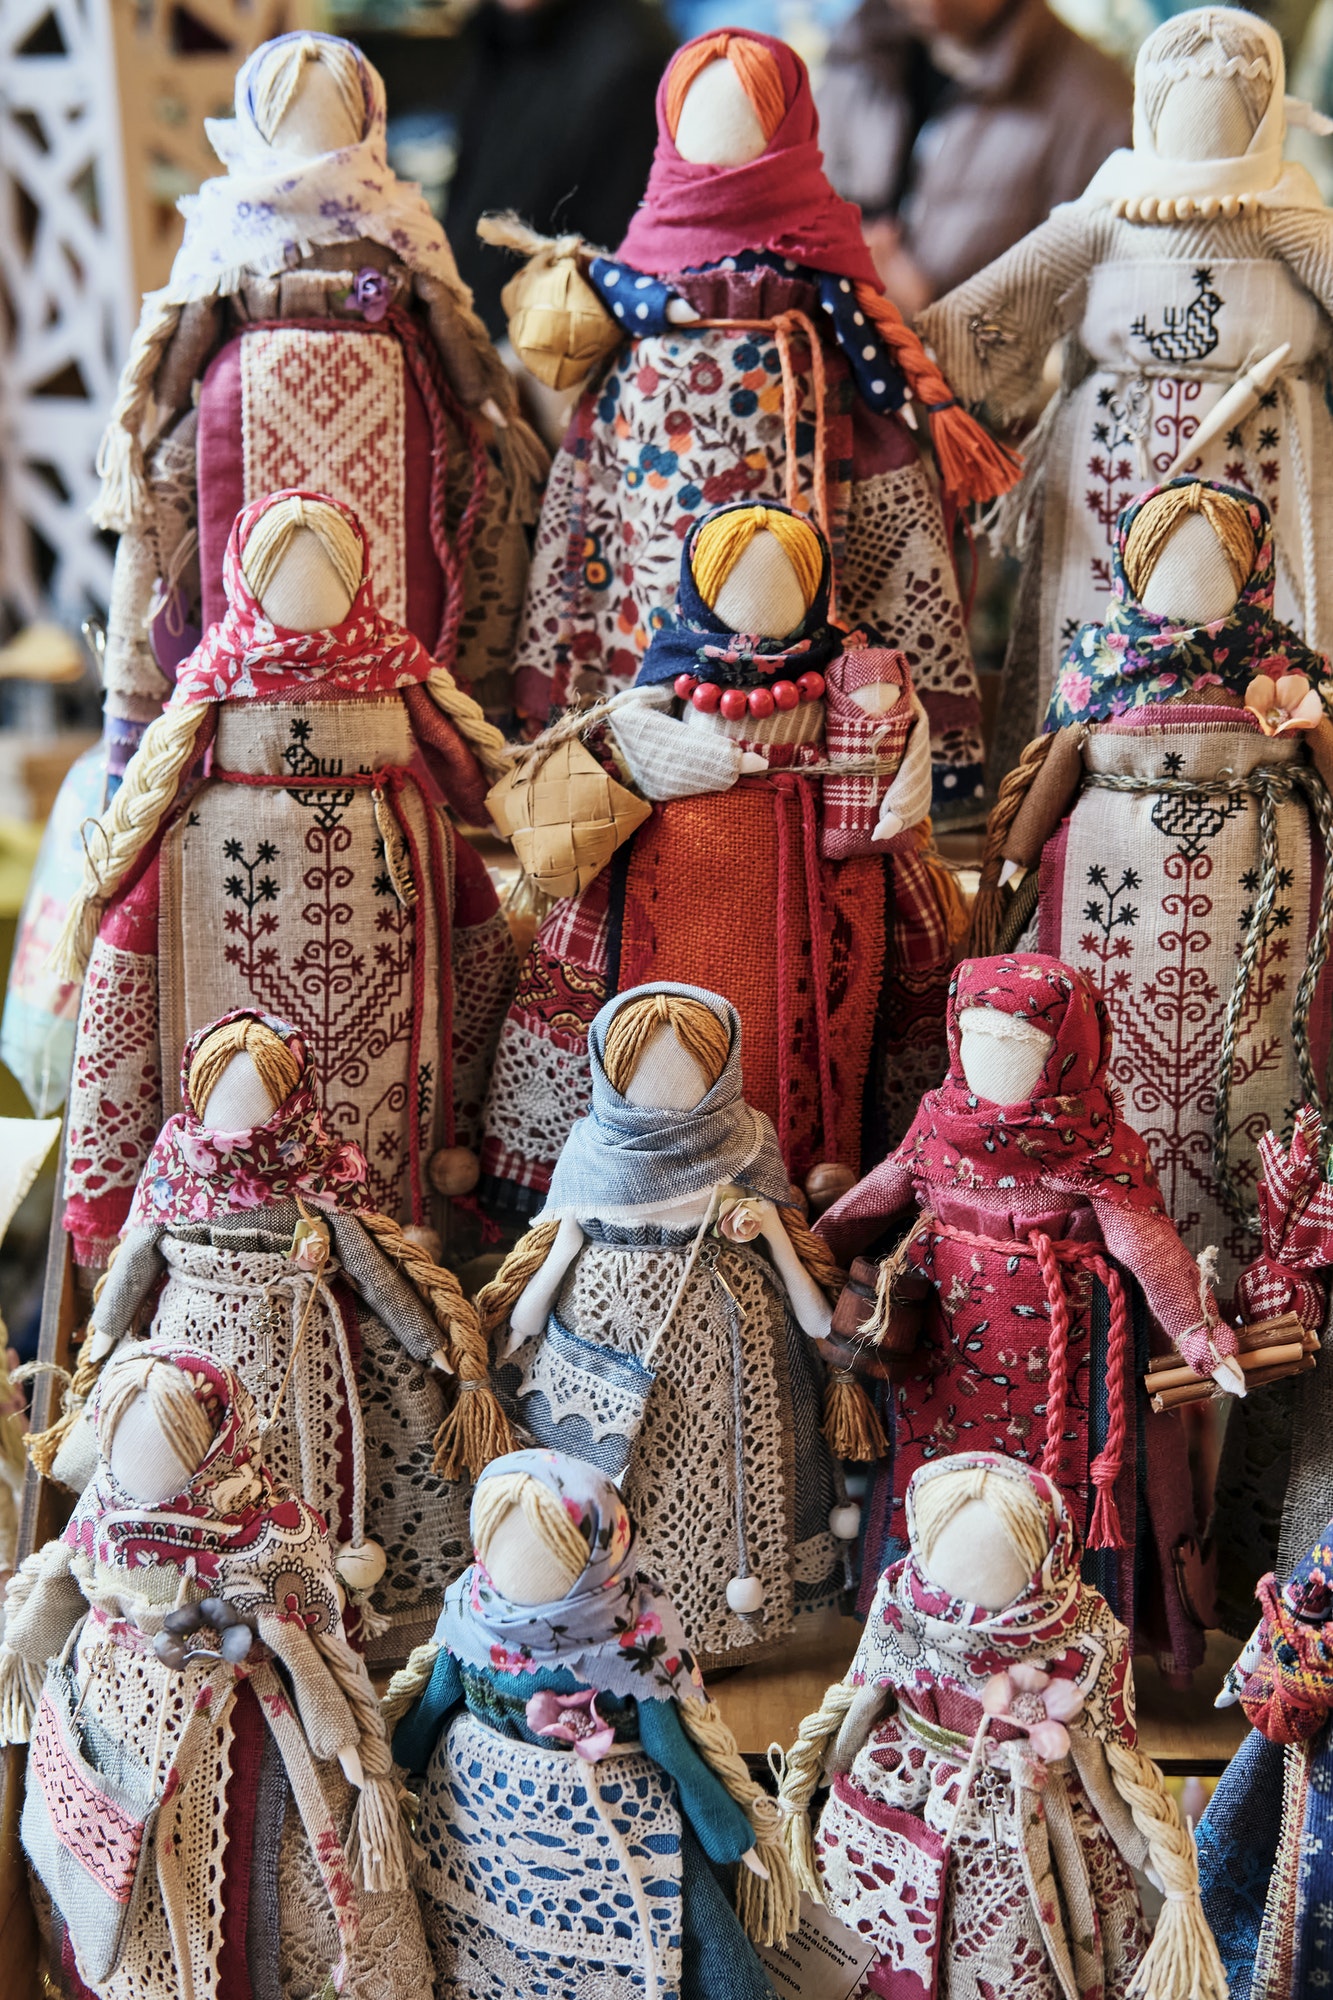 Russian traditional rag dolls - amulets associated with slavic pagan traditions